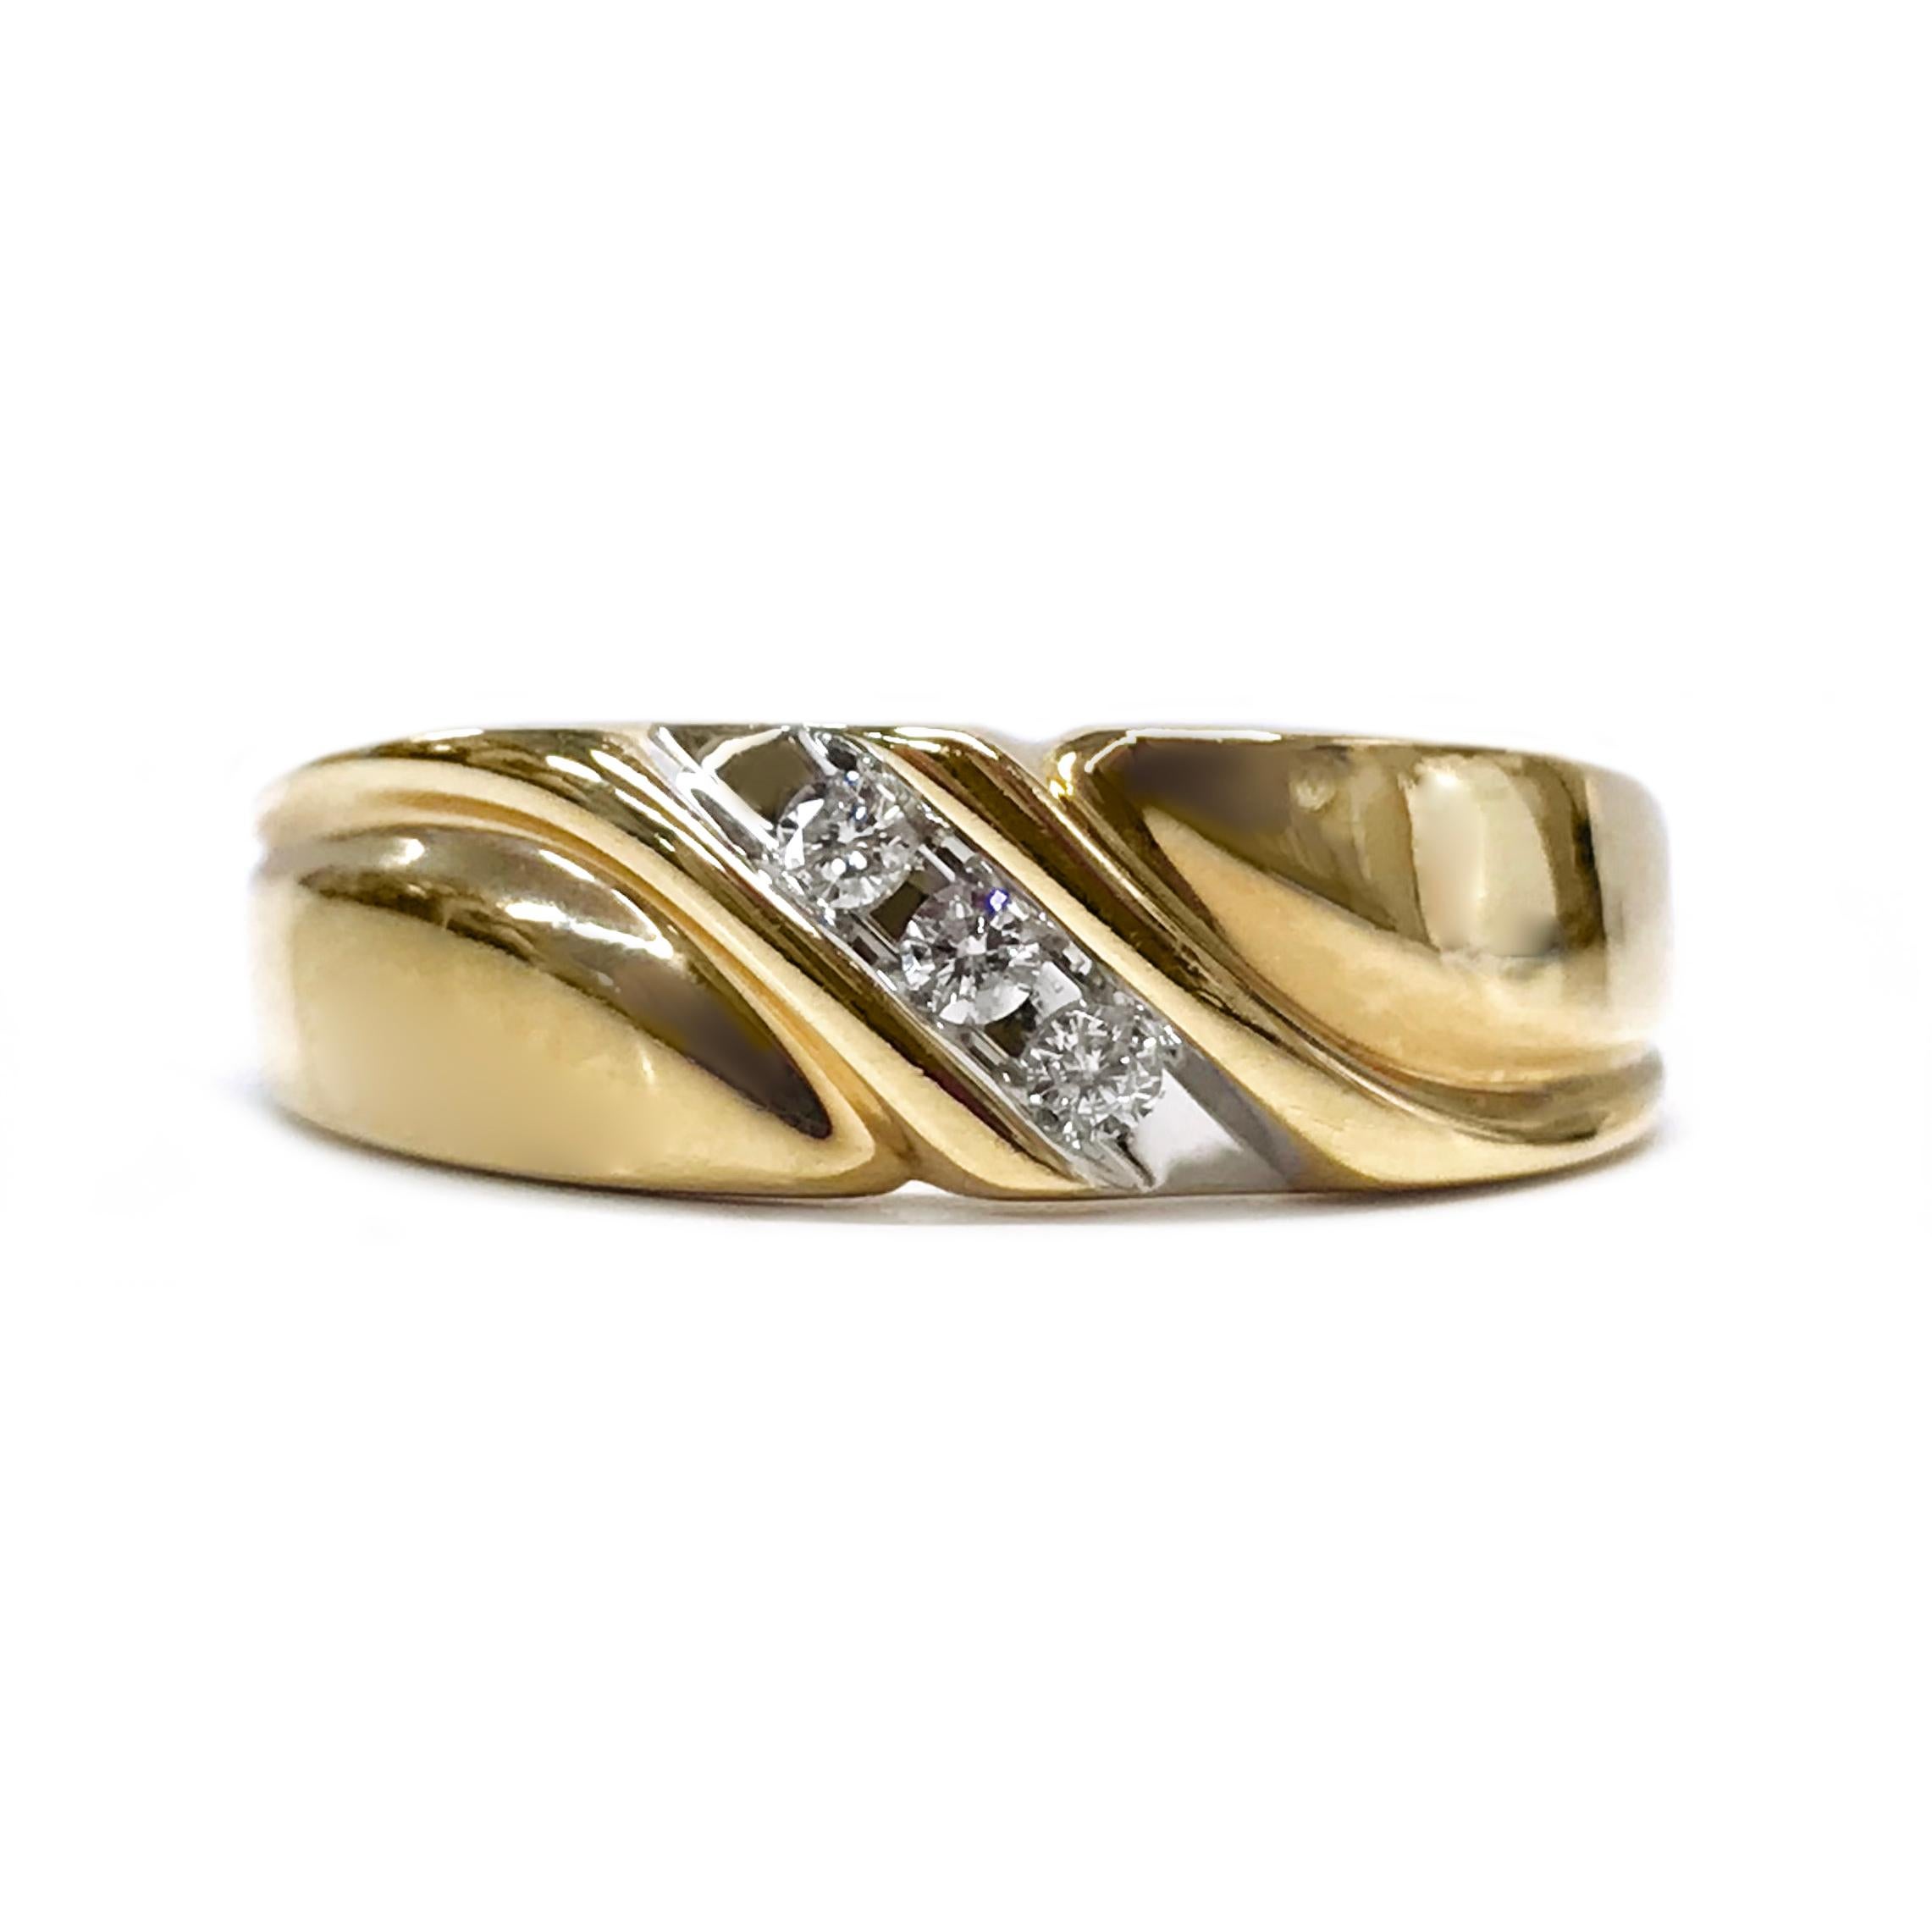 14 Karat Two-Tone Three Diamond ring. The ring features a yellow gold band with curves that meet at the center, at the center are three round channel-set diamonds set in white gold. The diamonds have a total carat weight of 0.75ctw. Stamped on the